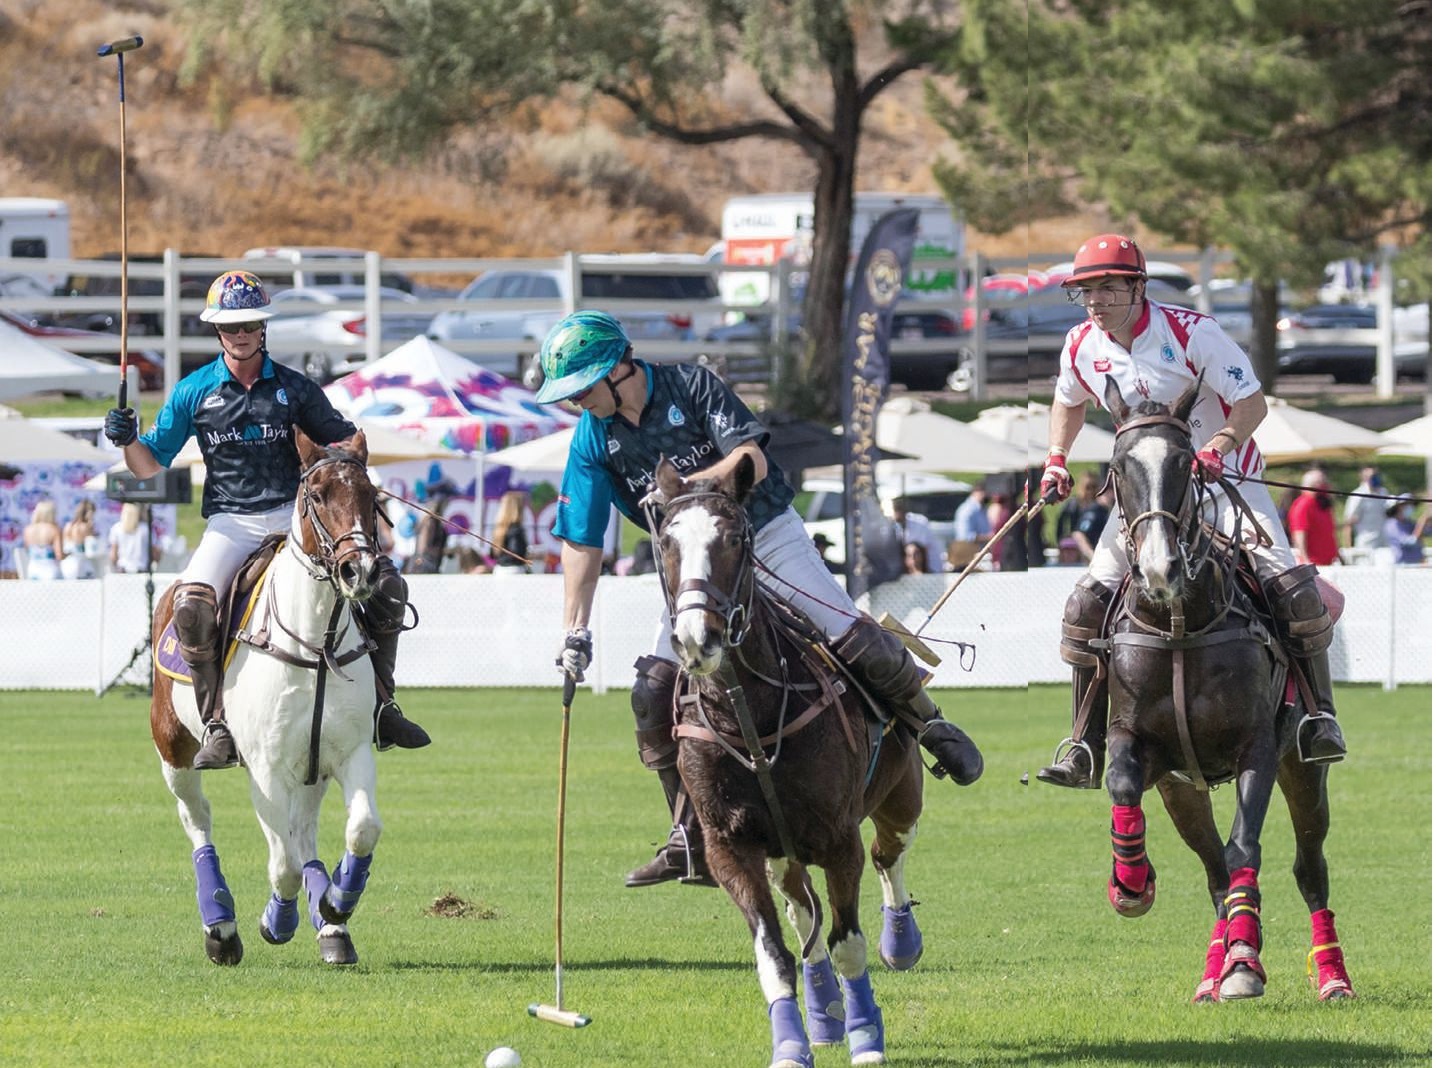 Players get into the action during a riveting match. PHOTO BY CARRIE EVANS / THE POLO PARTY